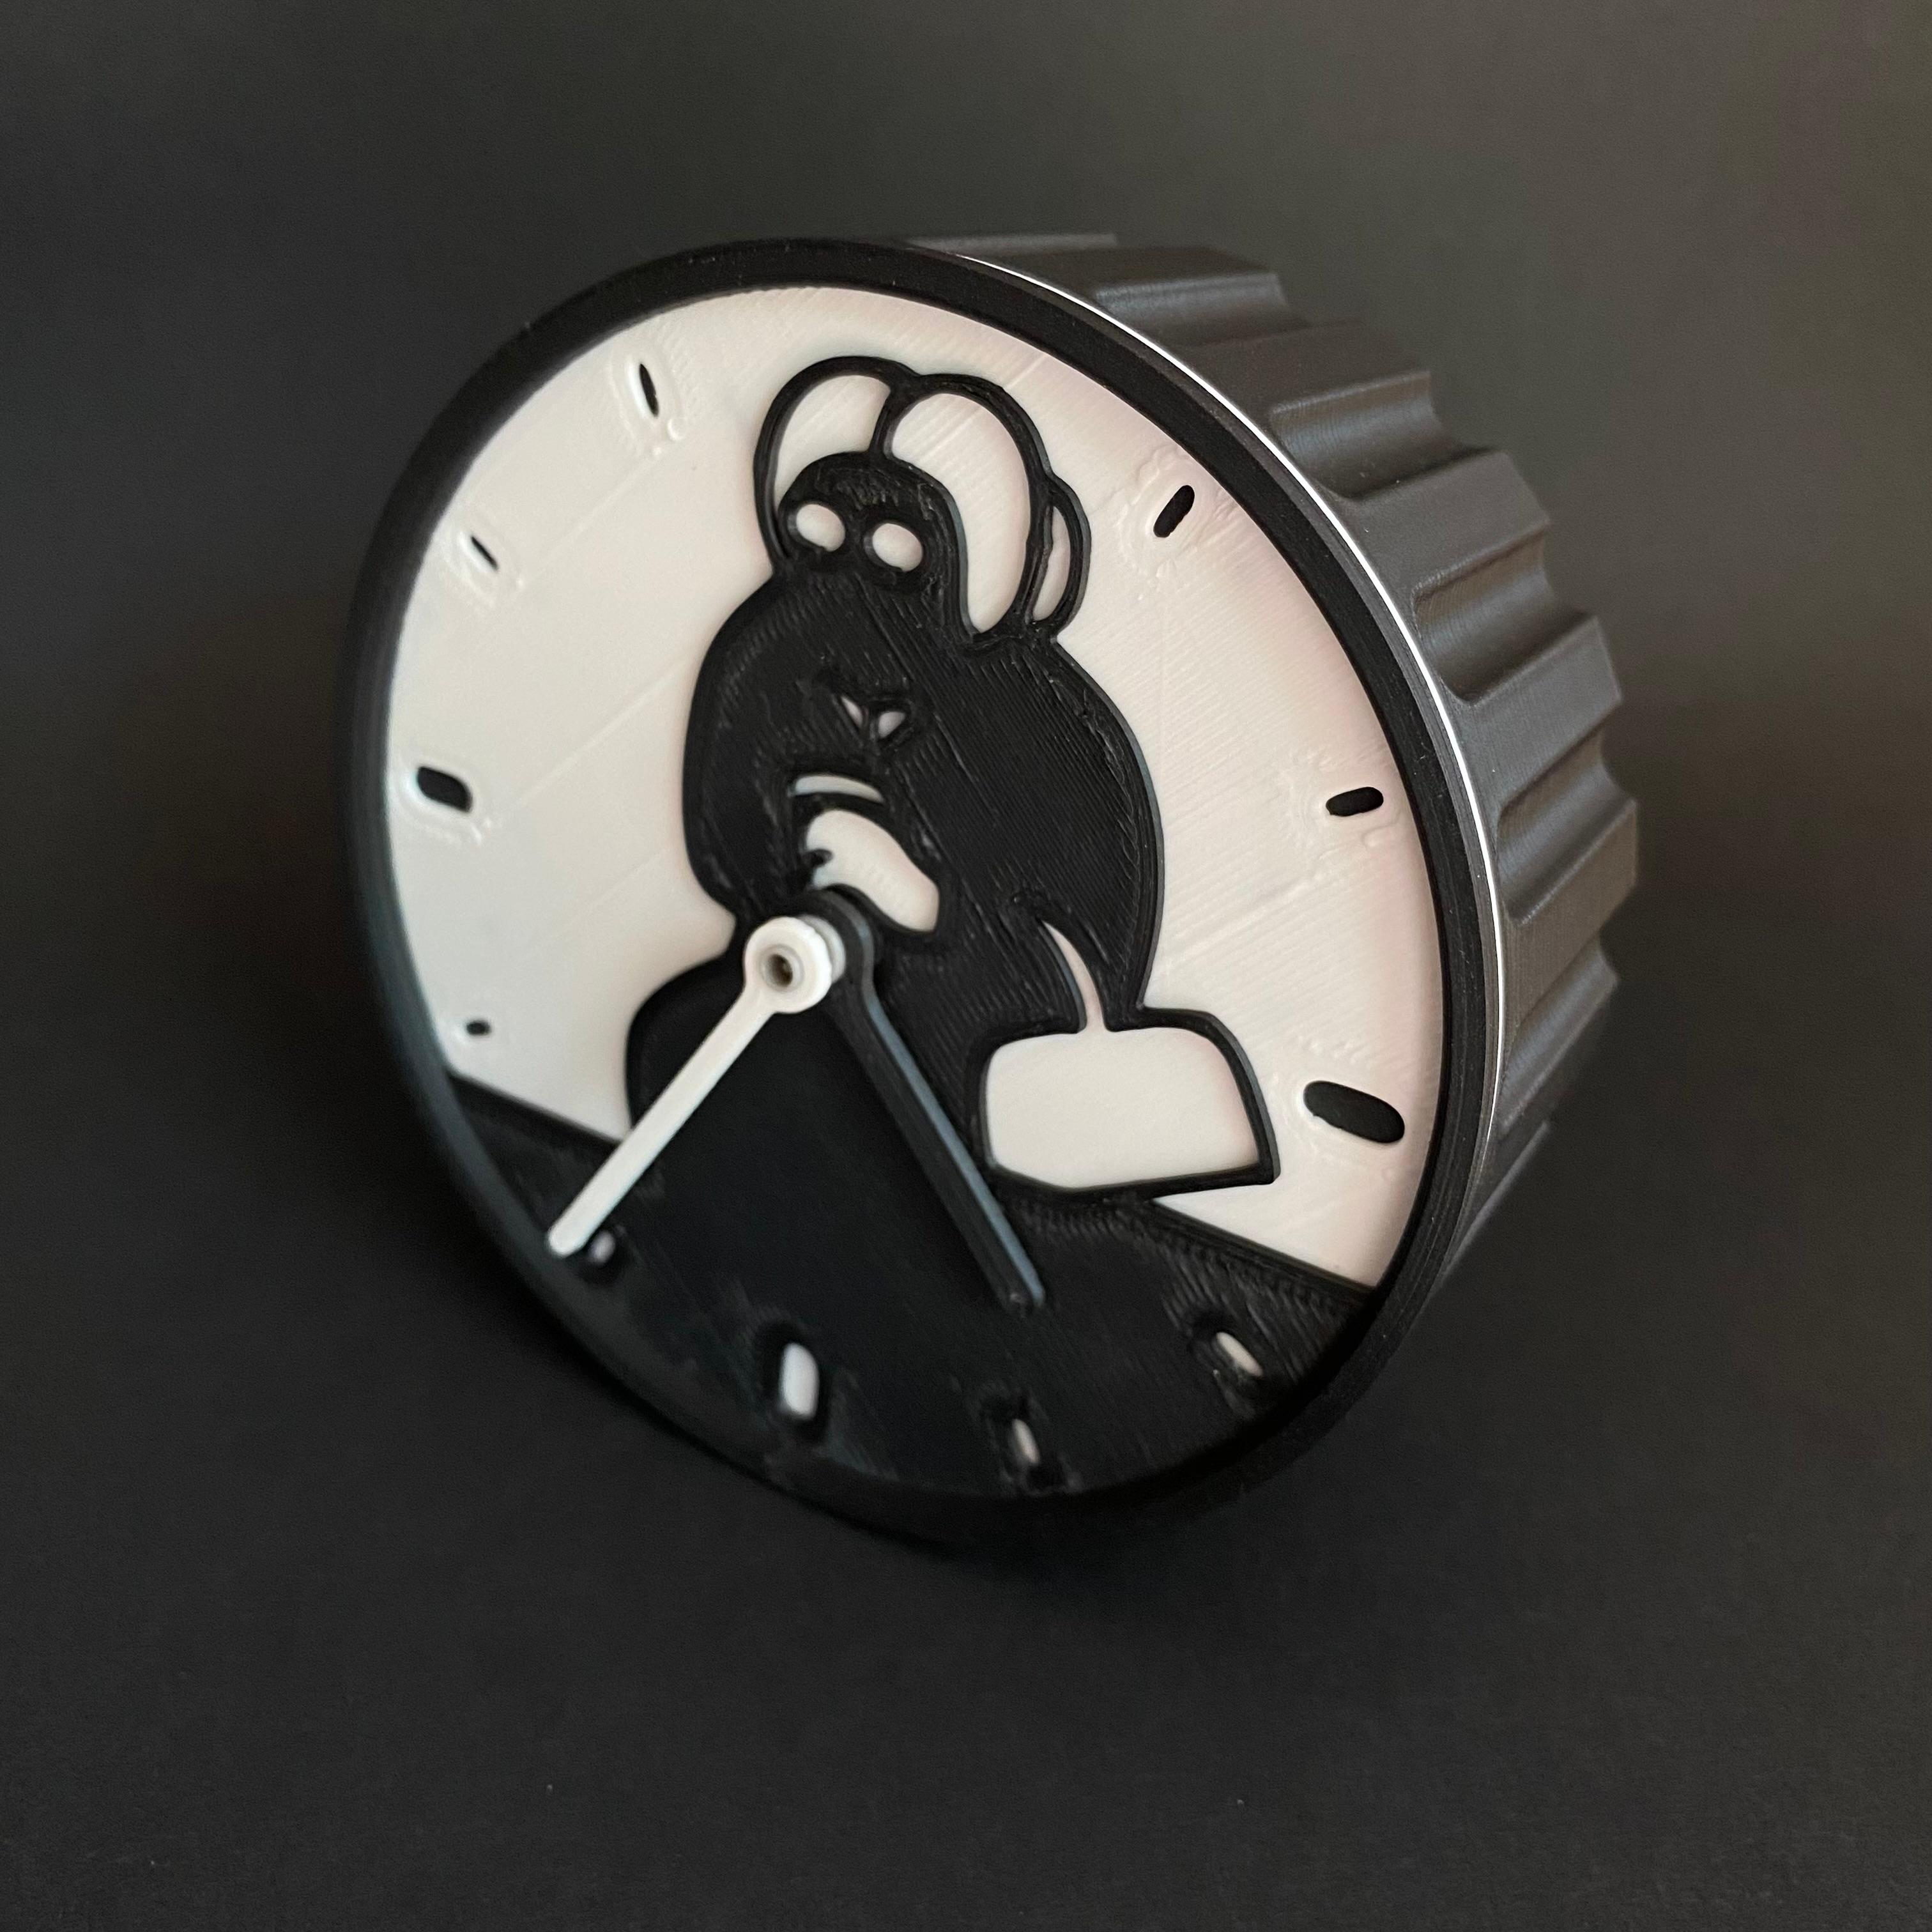 Creepy old lady from Vienna clock 3d model